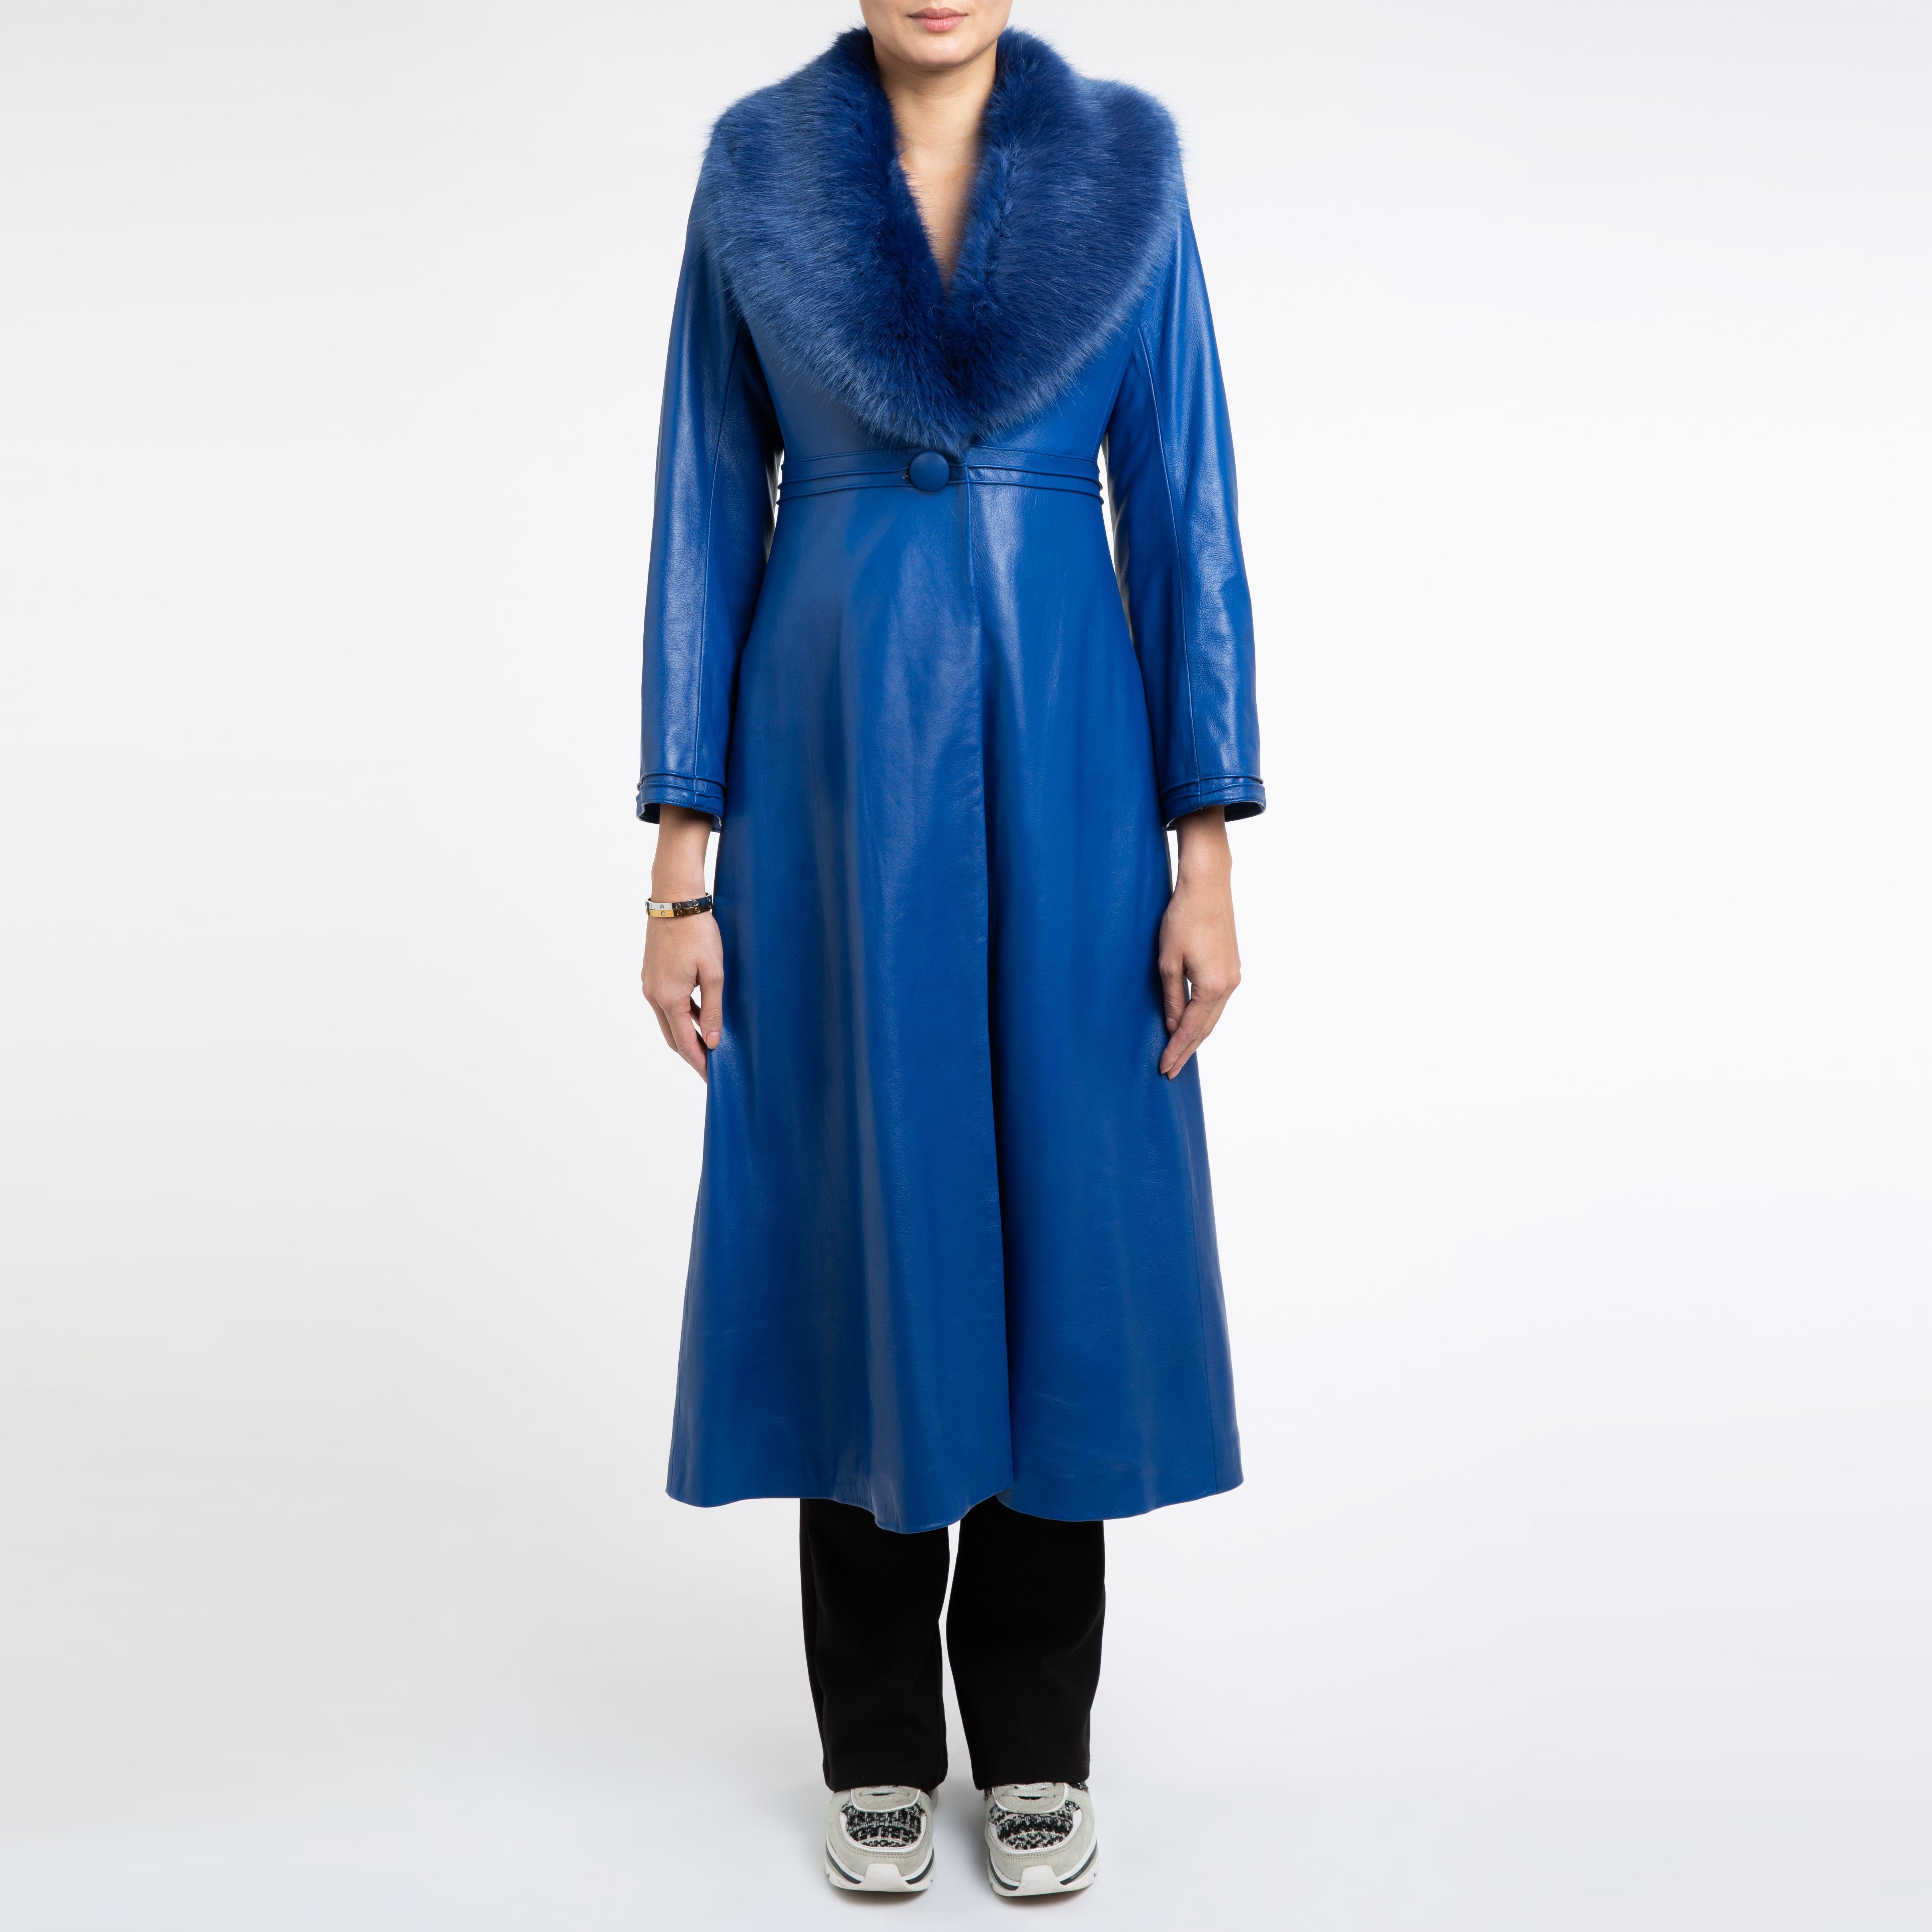 Verheyen London Edward Leather Coat in Blue with Faux Fur - Size uk 14

The Edward Leather Coat created by Verheyen London is a romantic design inspired by the 1970s and Edwardian Era of Fashion.  A timeless design to be be worn for a lifetime and